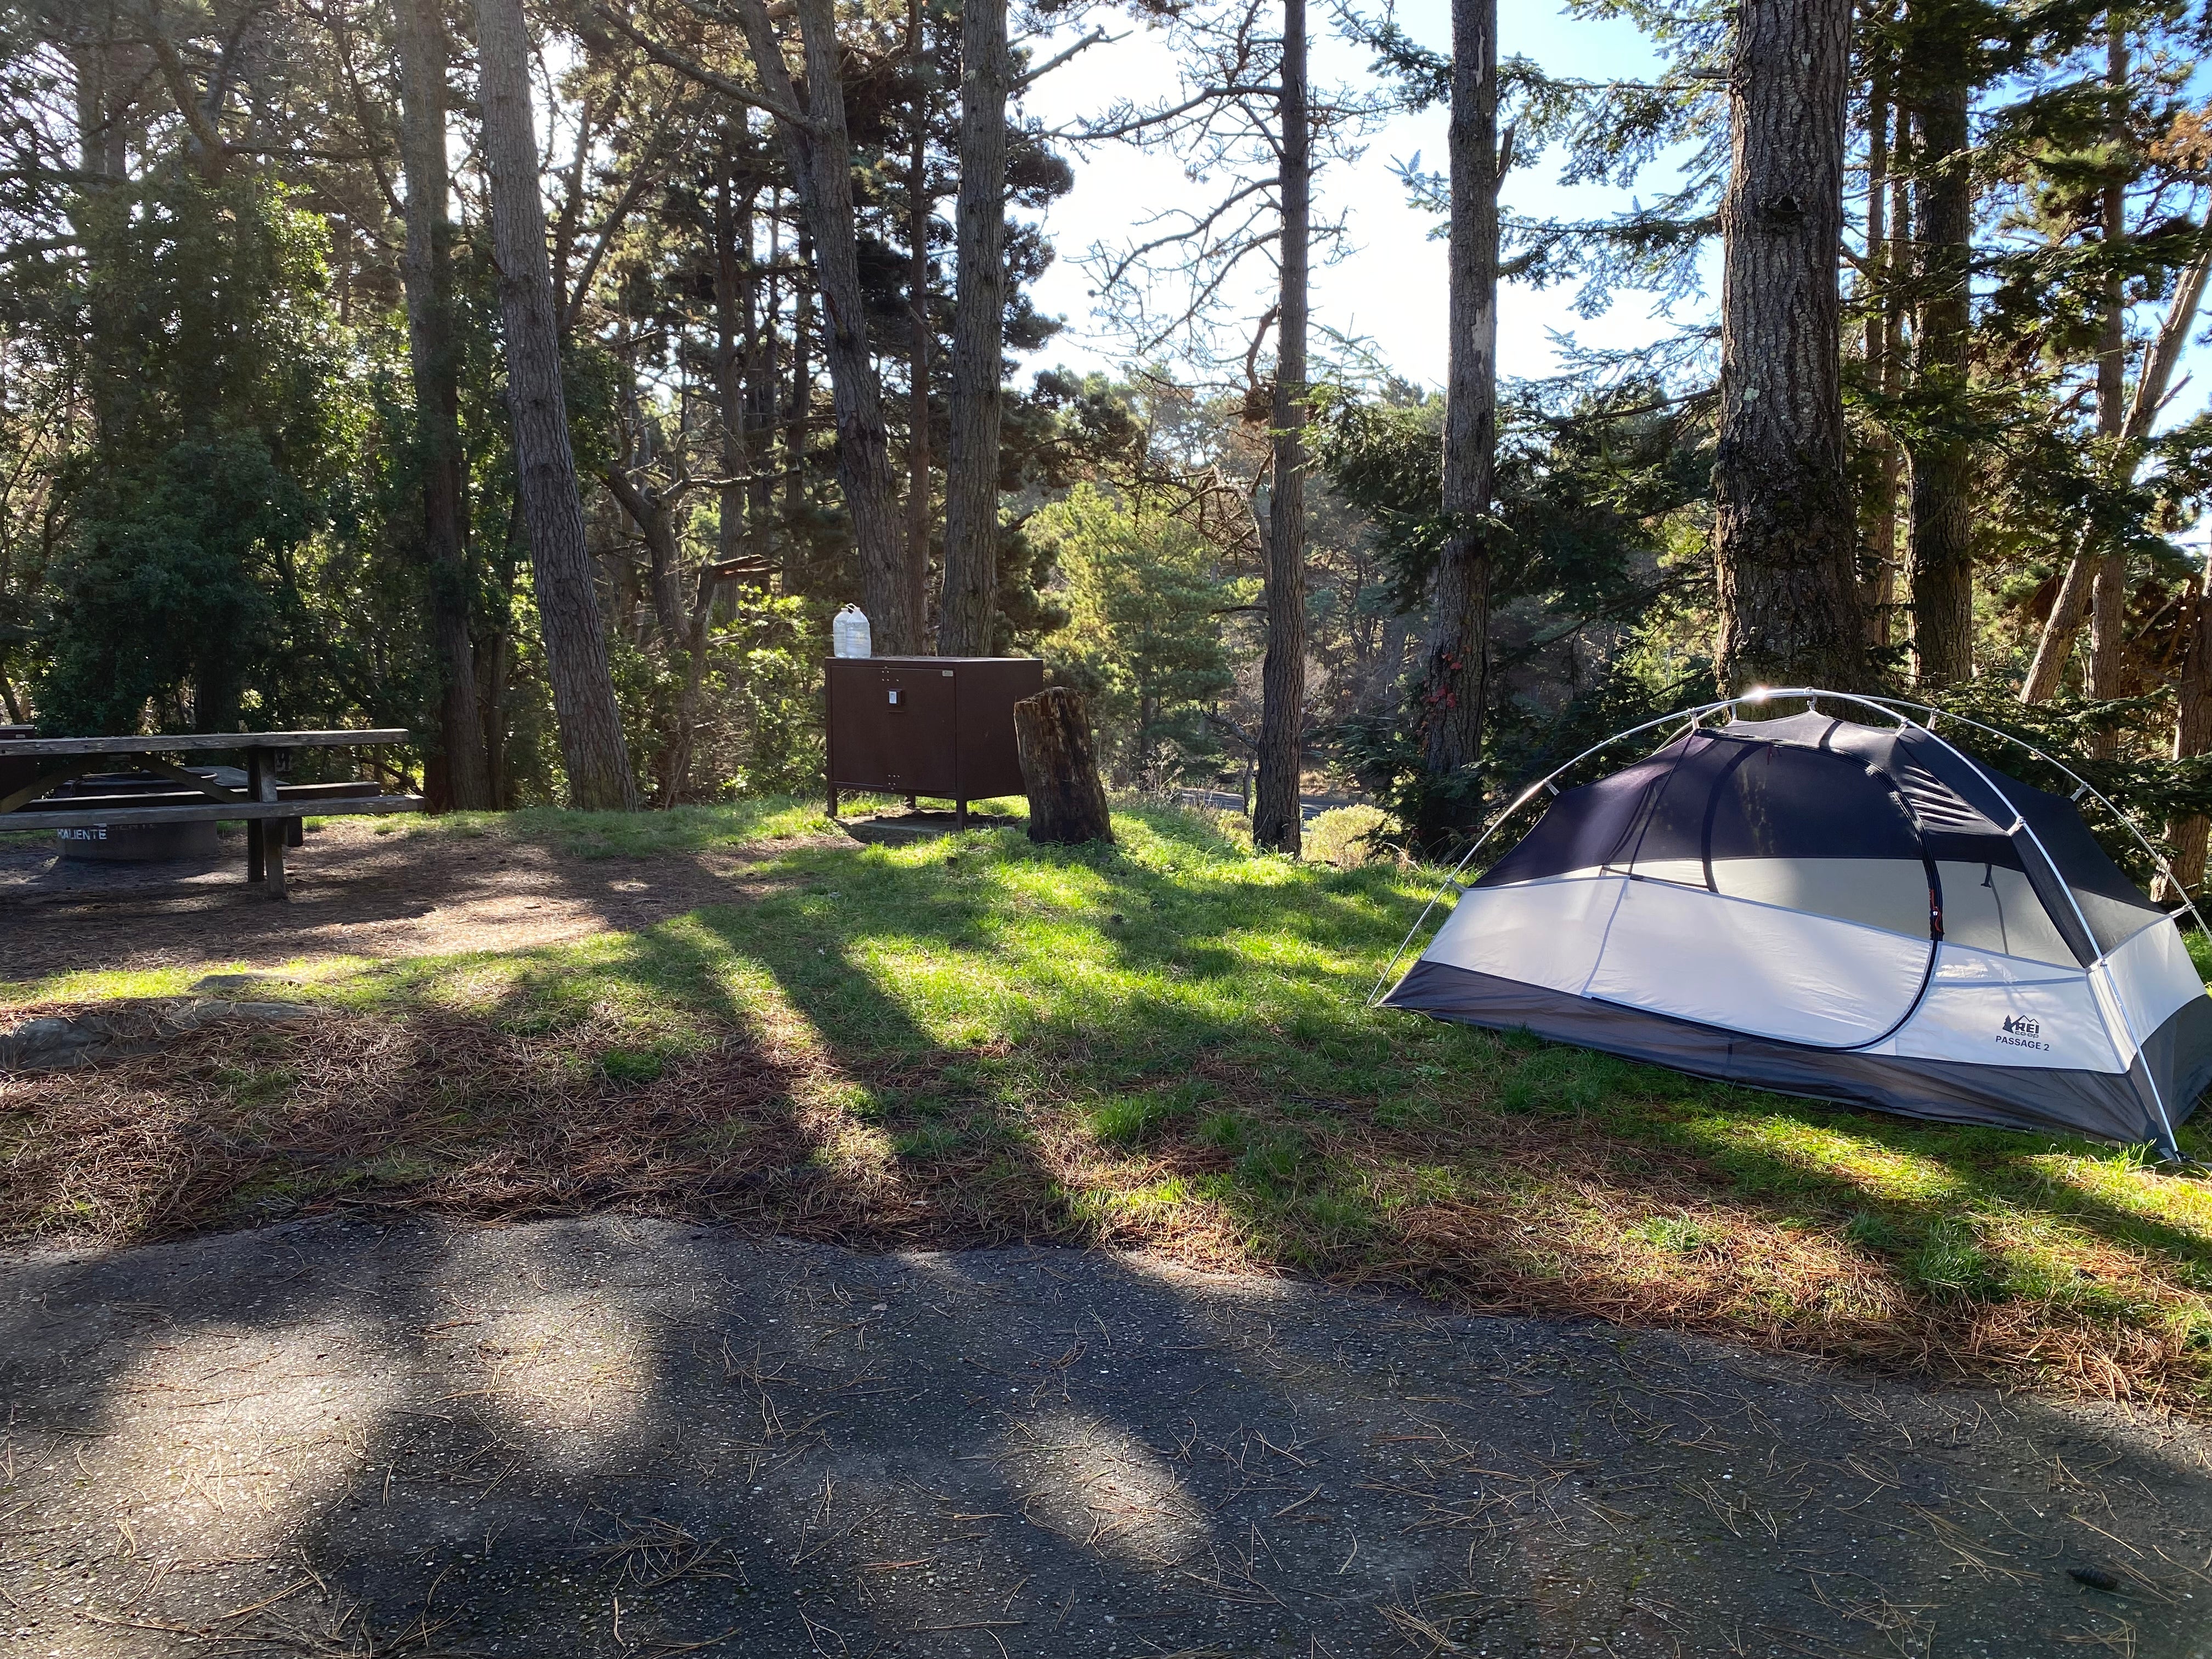 Camper submitted image from Stillwater Cove Regional Park - 1